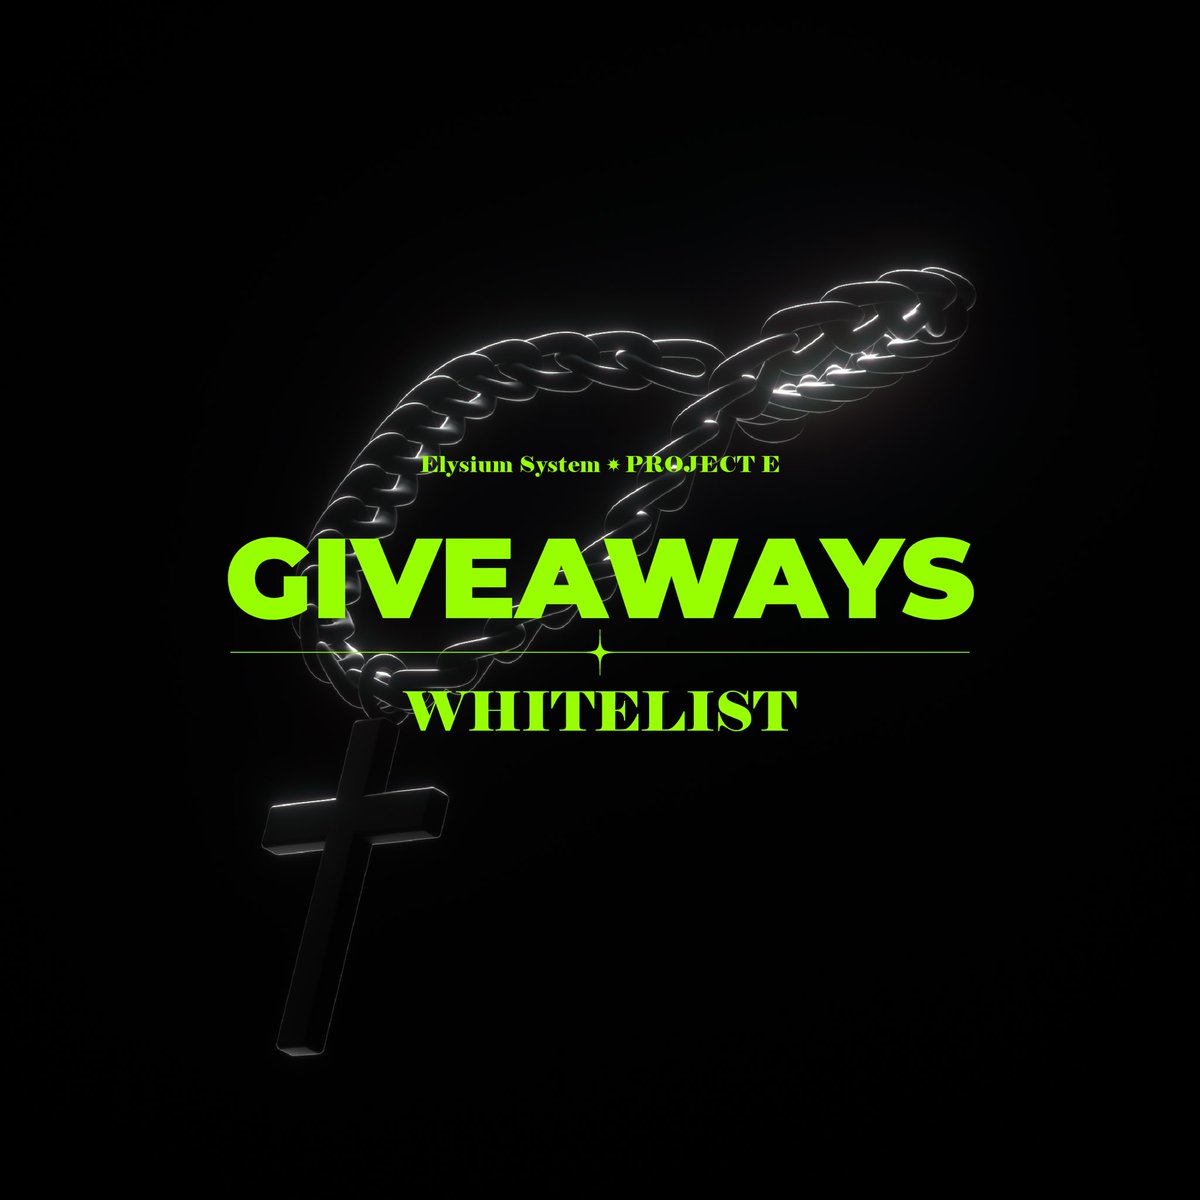 Giveaway 3 whitelist spots on this tweet: 👇 • Follow @elysium_system • Retweet and like this tweet • Tag 3 Friends in the comments Winner pick in 48hr. #ProjectE #Whitelist